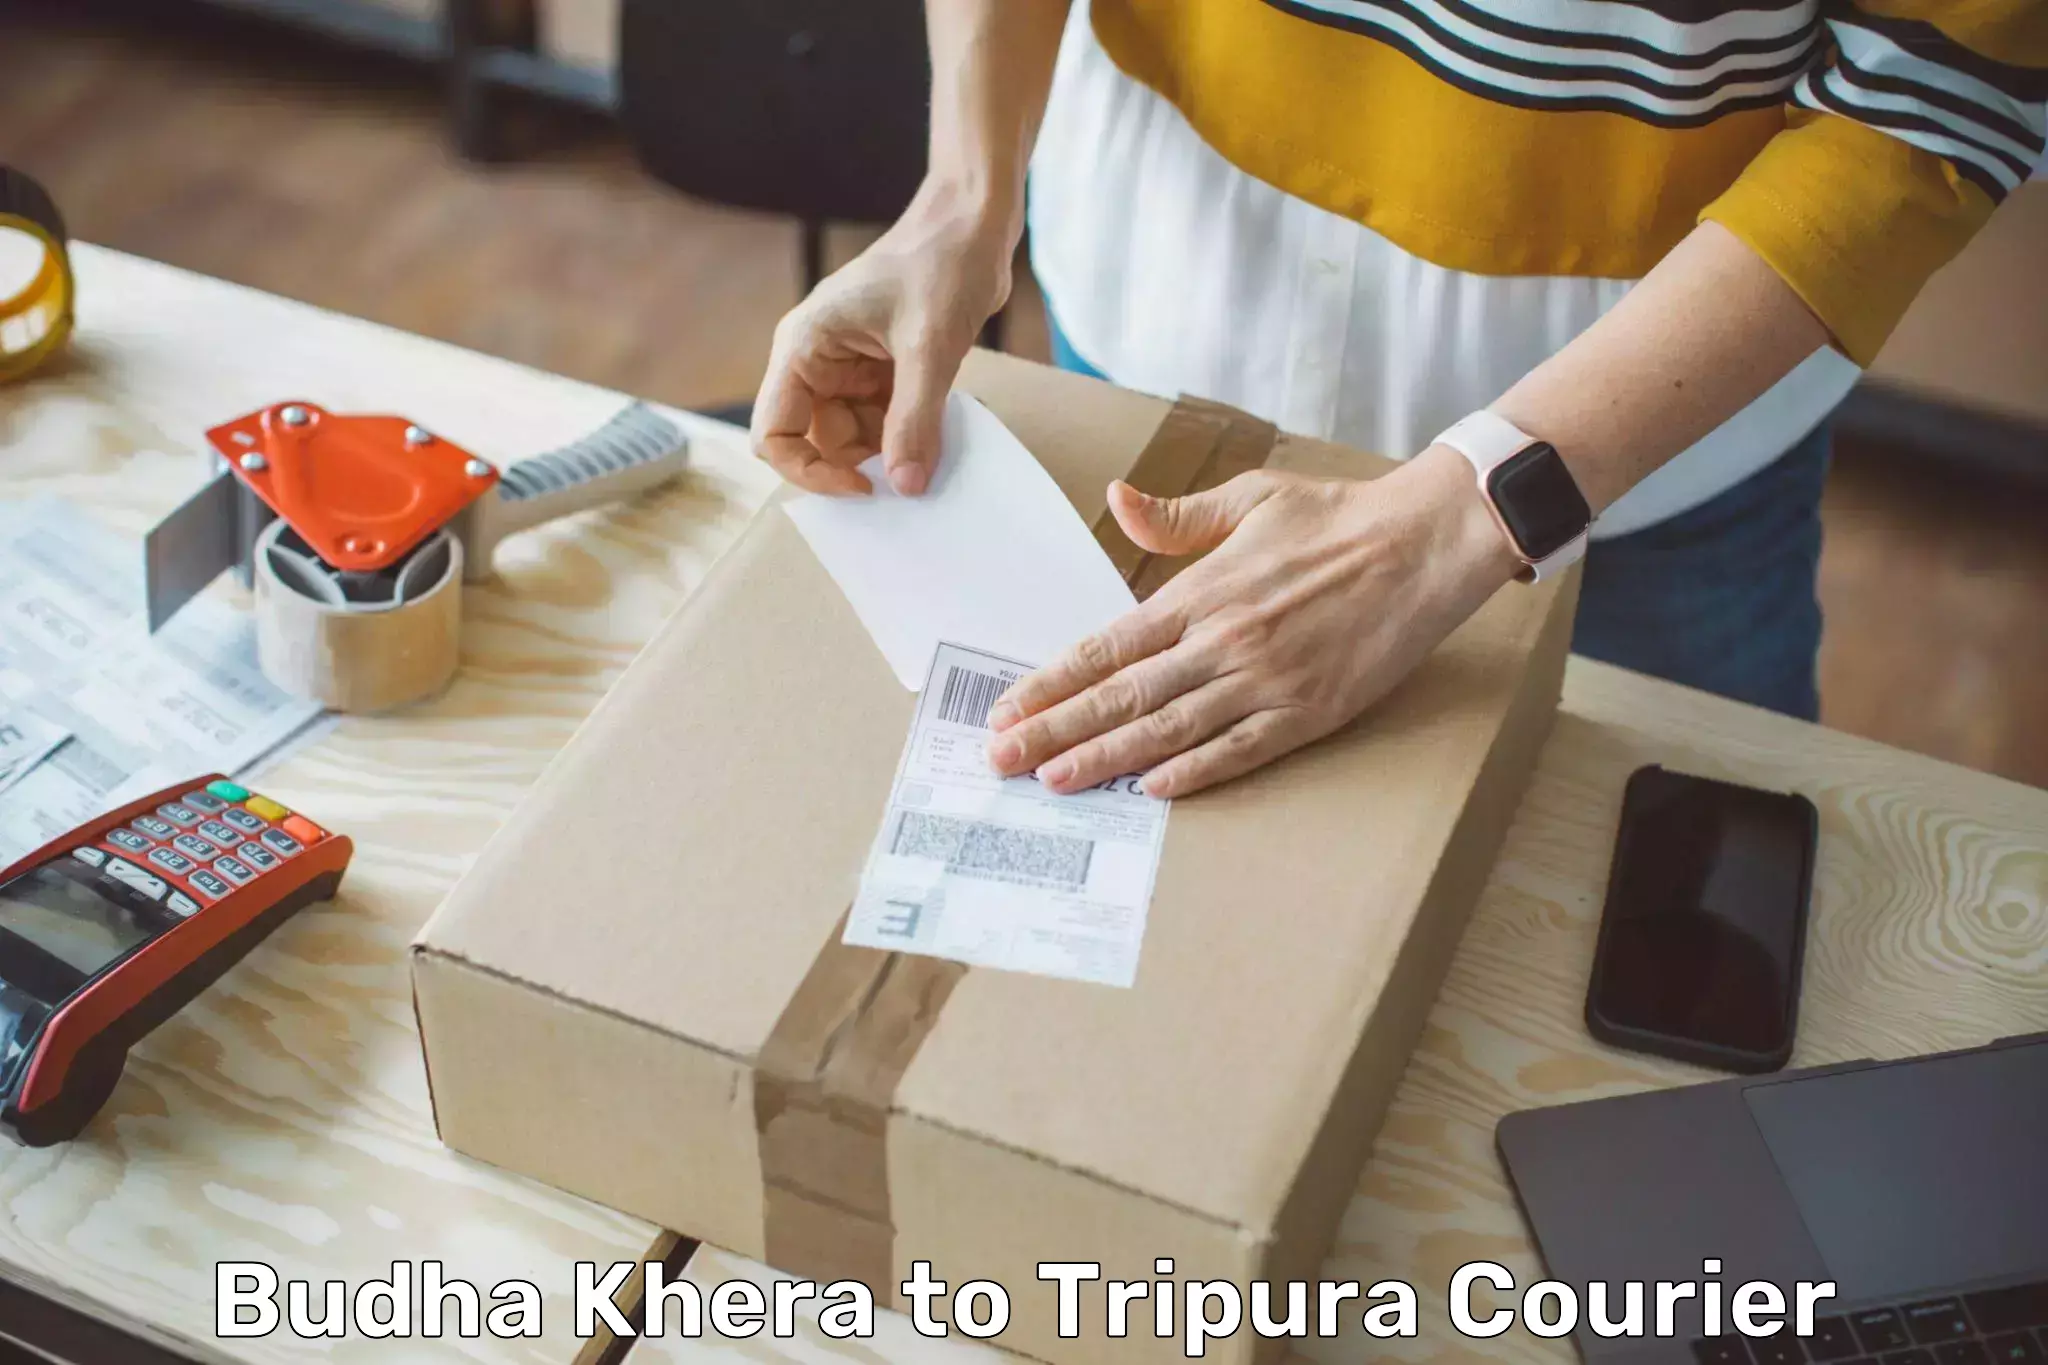 Reliable delivery network in Budha Khera to Udaipur Tripura